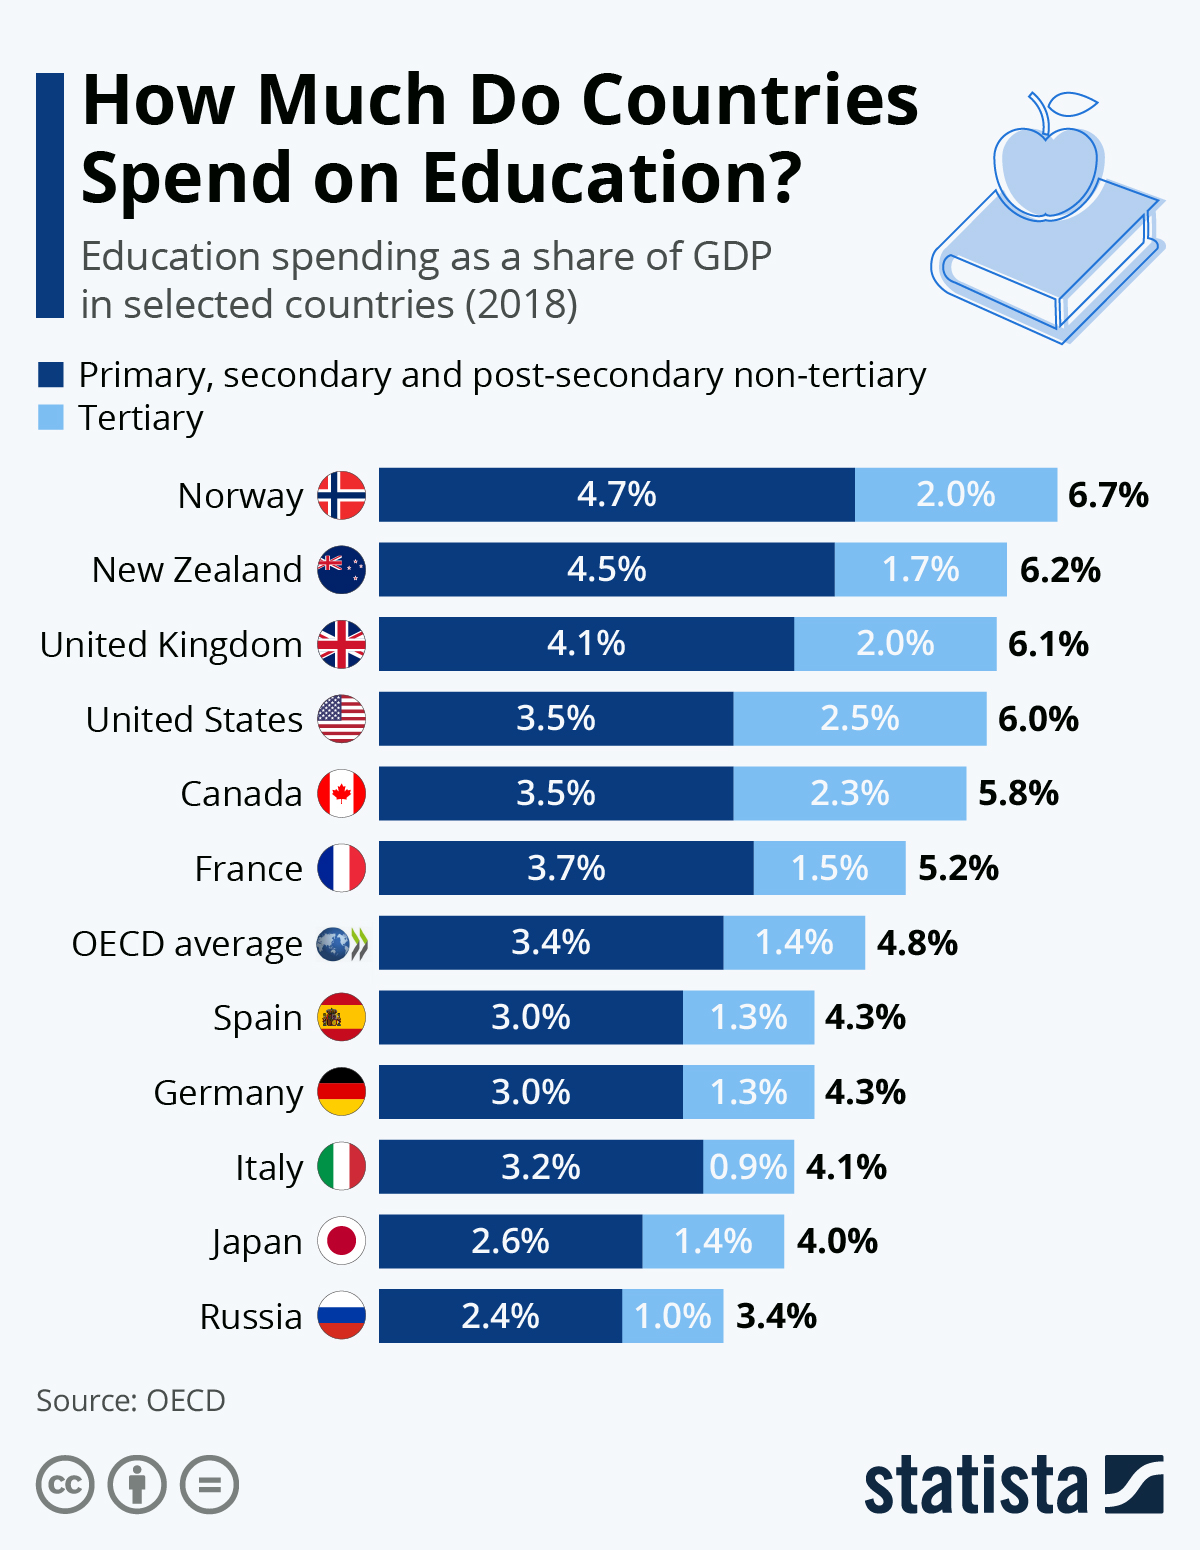 20210916 - How Much Do Countries Spend on Educationjpeg